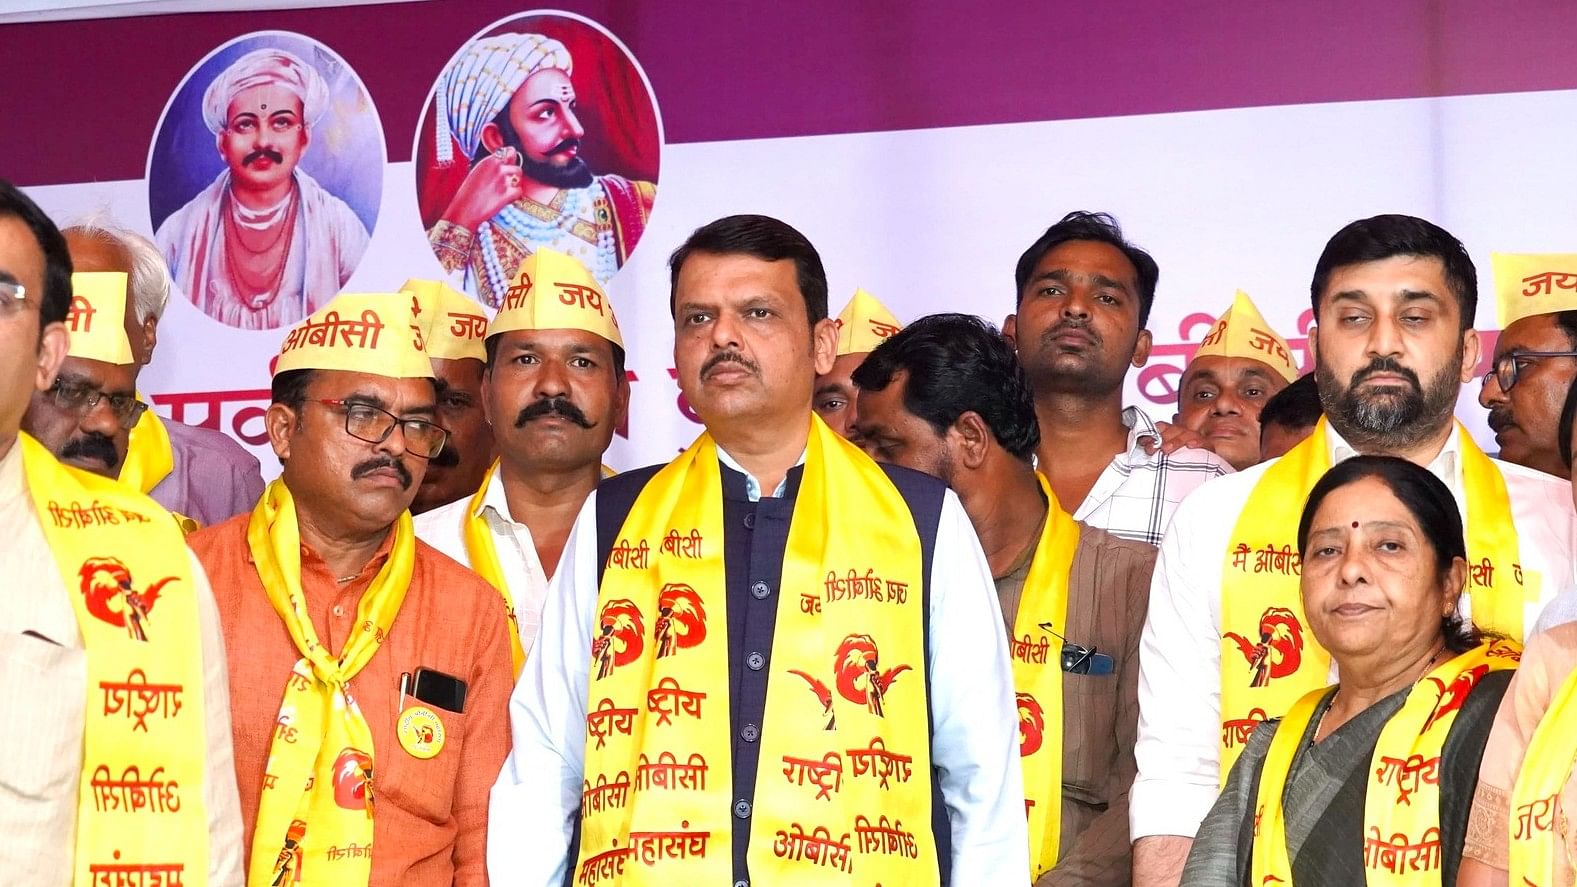 <div class="paragraphs"><p>Maharashtra deputy CM Devendra Fadnavis at a meet with OBC protesters in Nagpur on 17 September.</p></div>